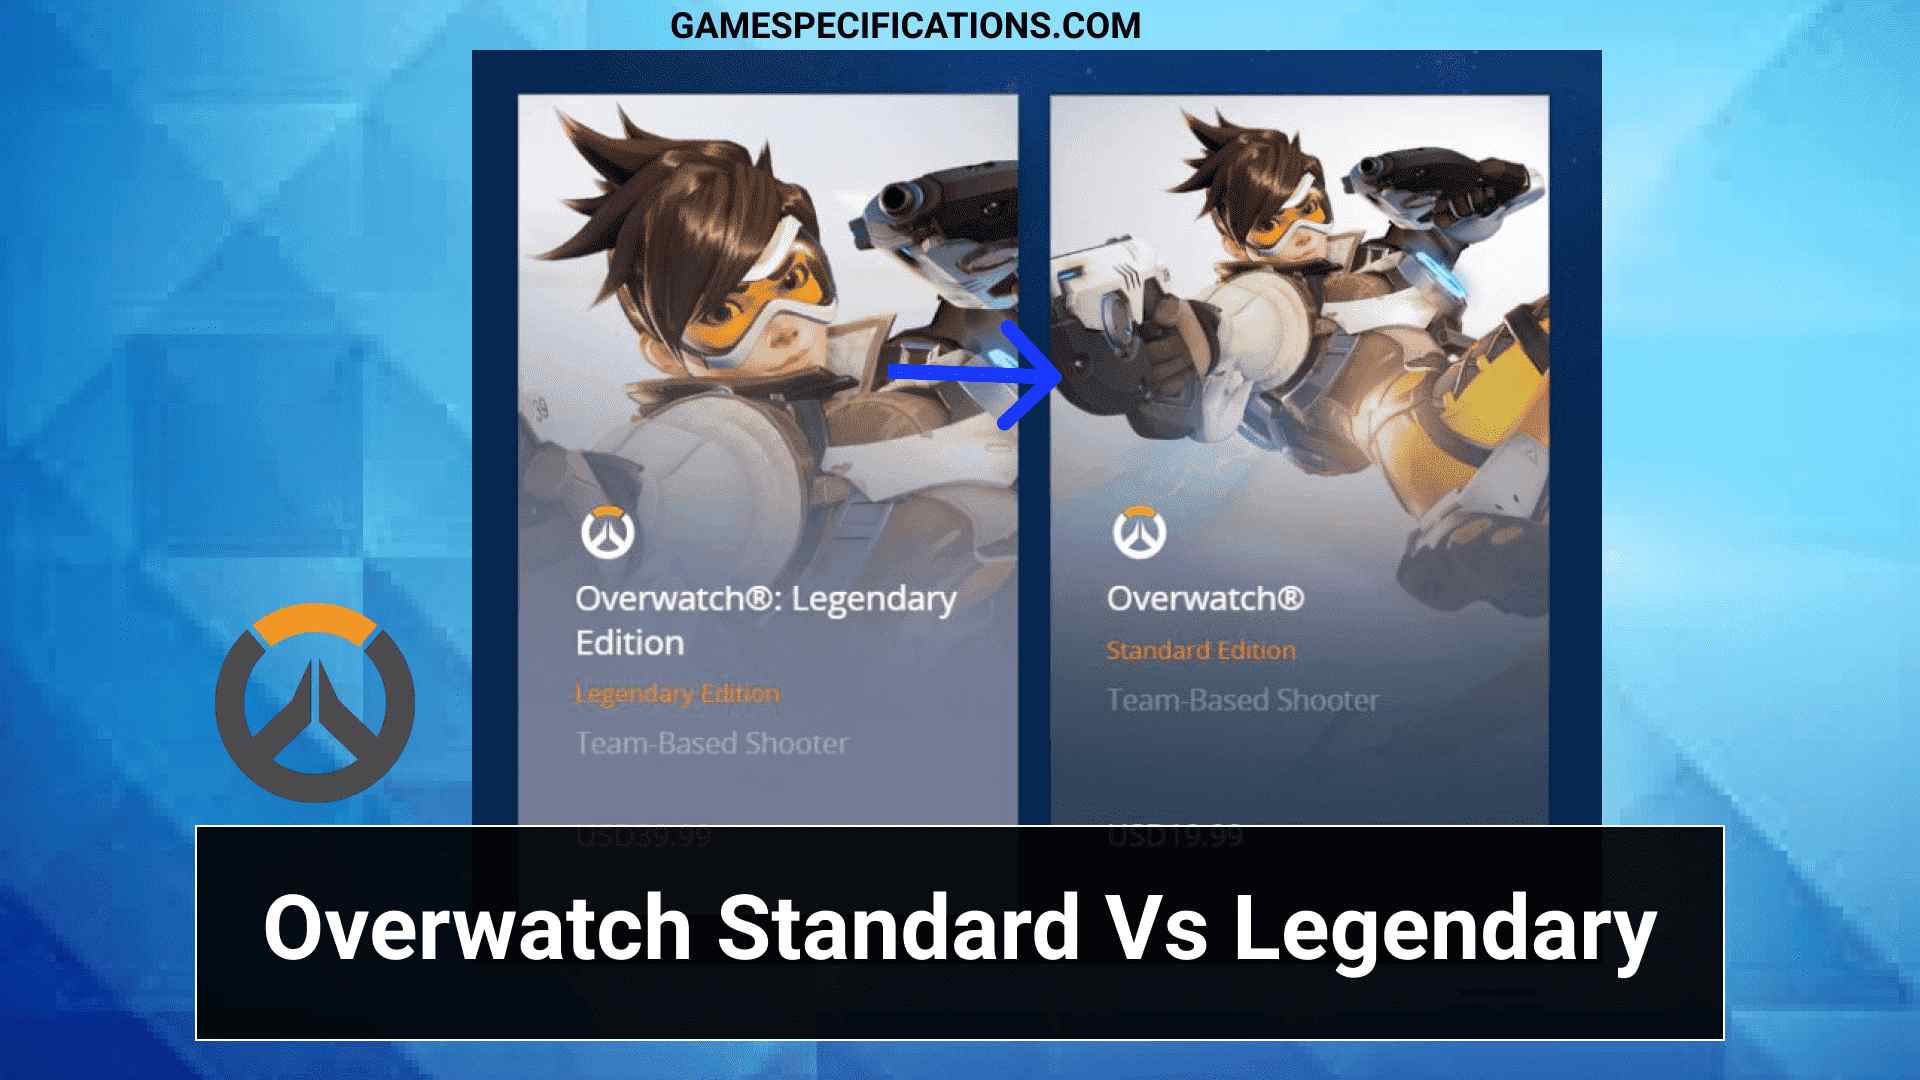 Overwatch Standard Vs Legendary: 3 Differences That Matters The Most